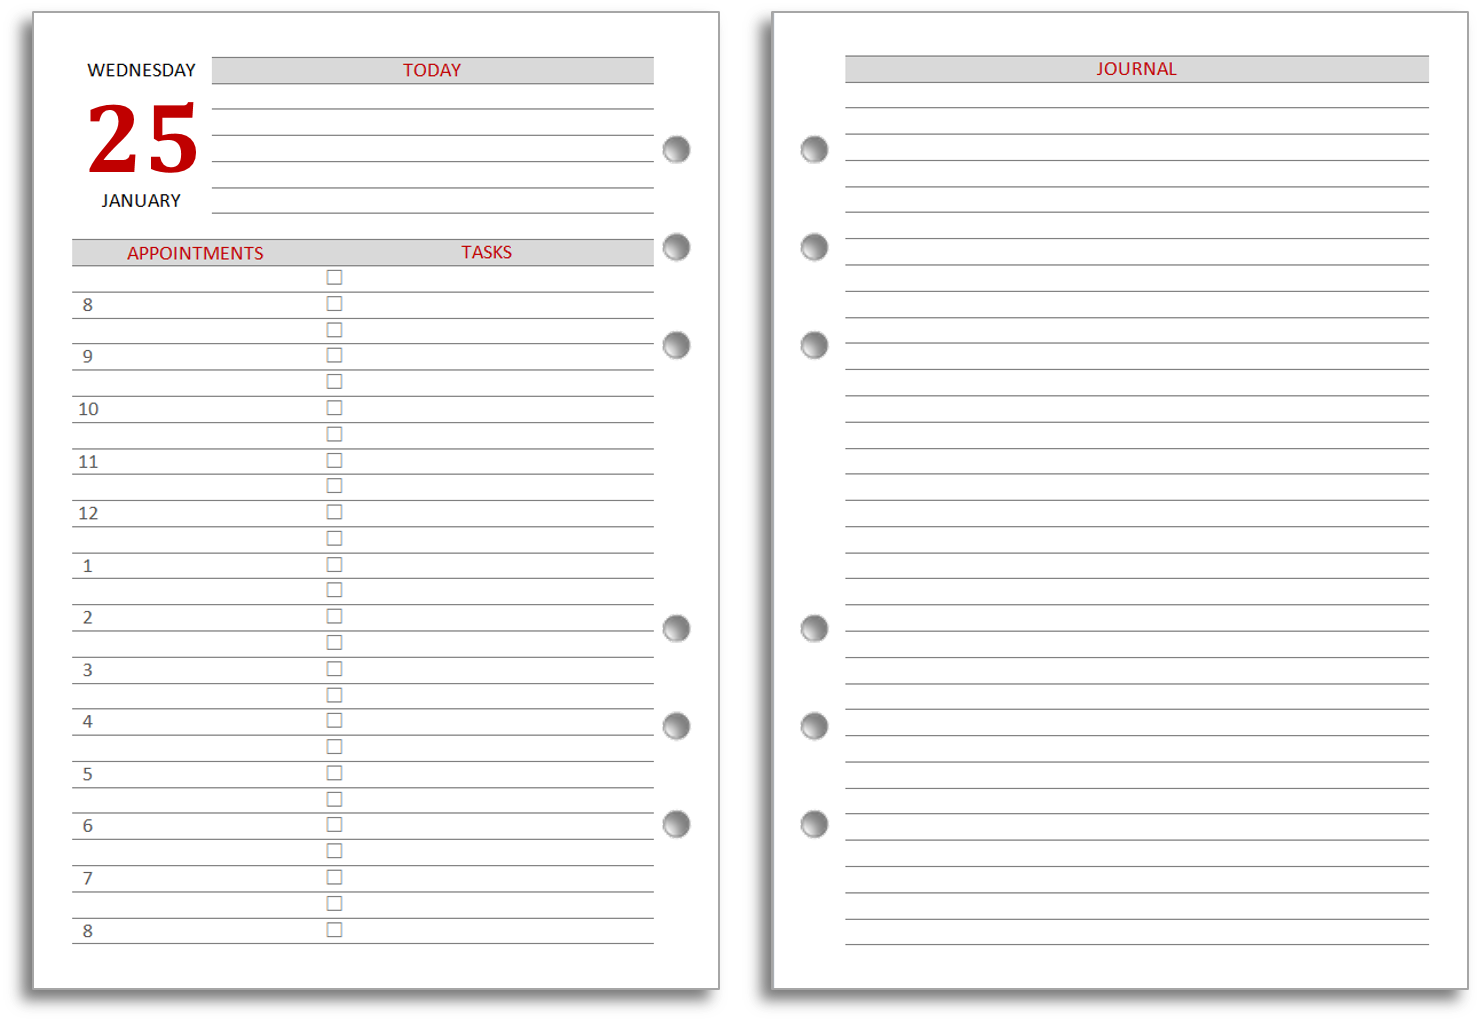 My Life All in One Place Free 2019 Filofax calendar (diary) downloads